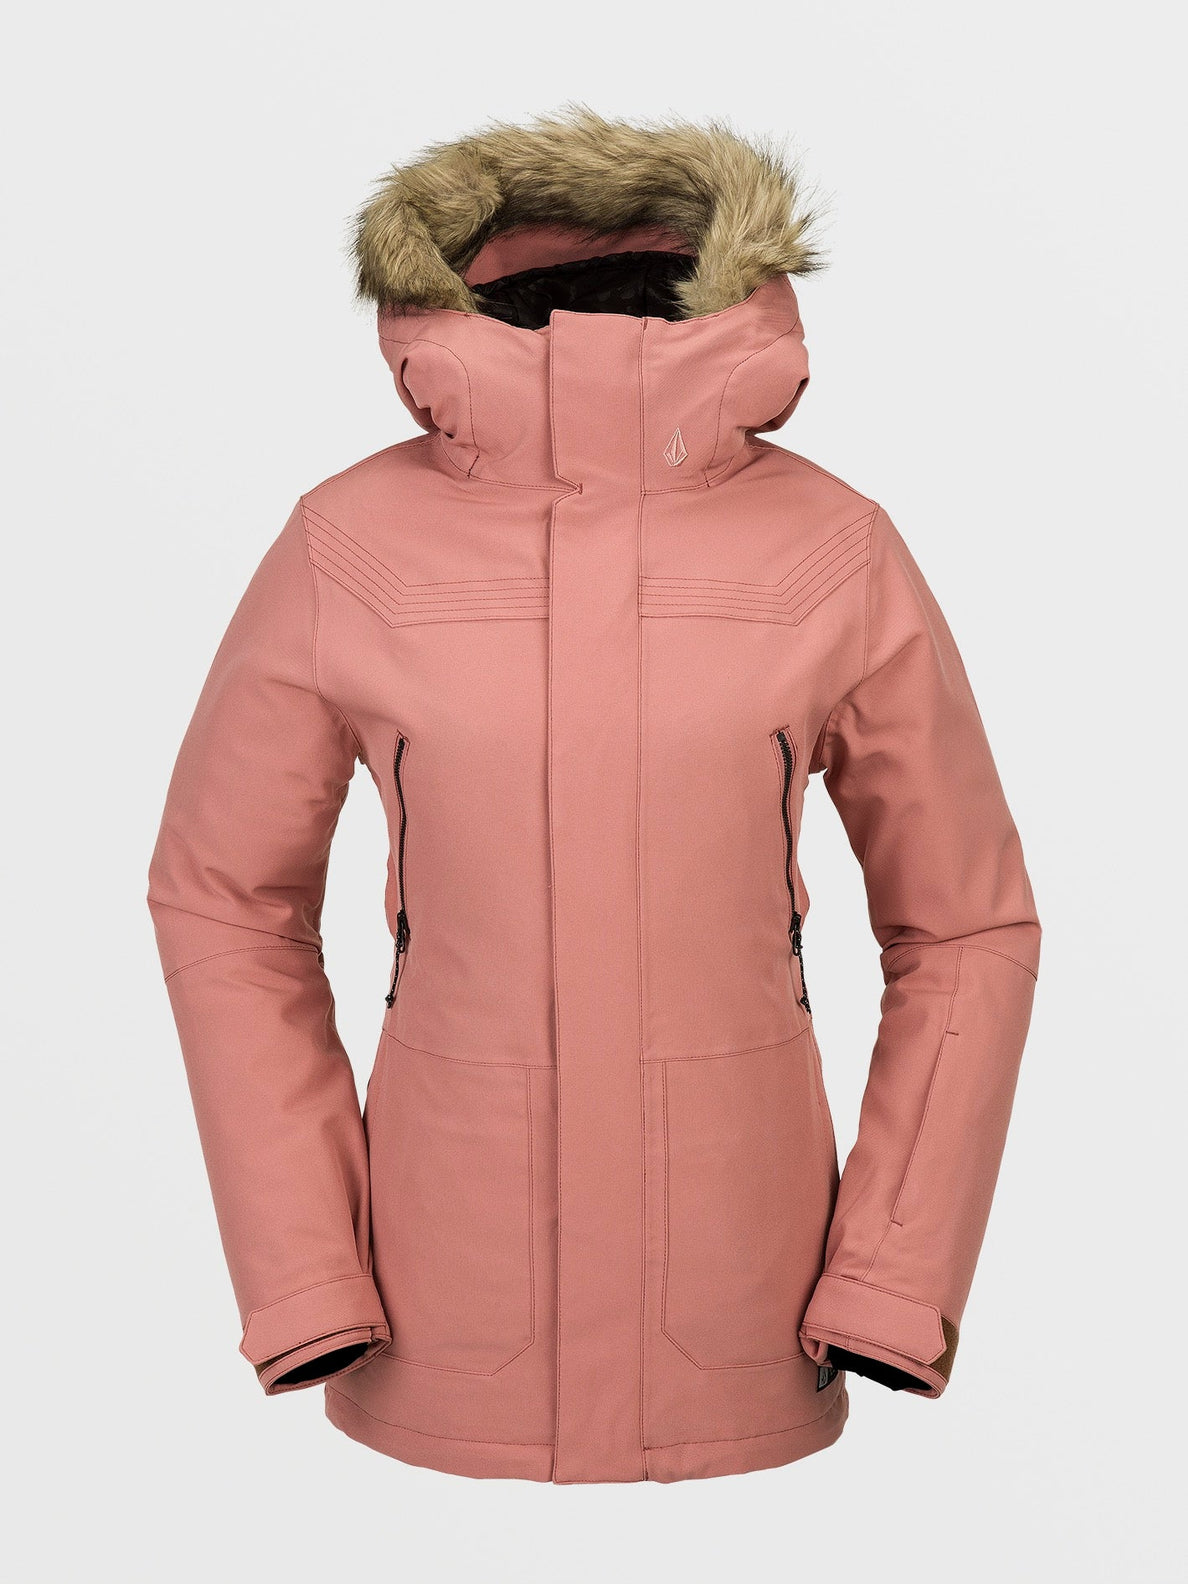 Shadow Insulated Jacket - EARTH PINK (H0452408_EPK) [F]